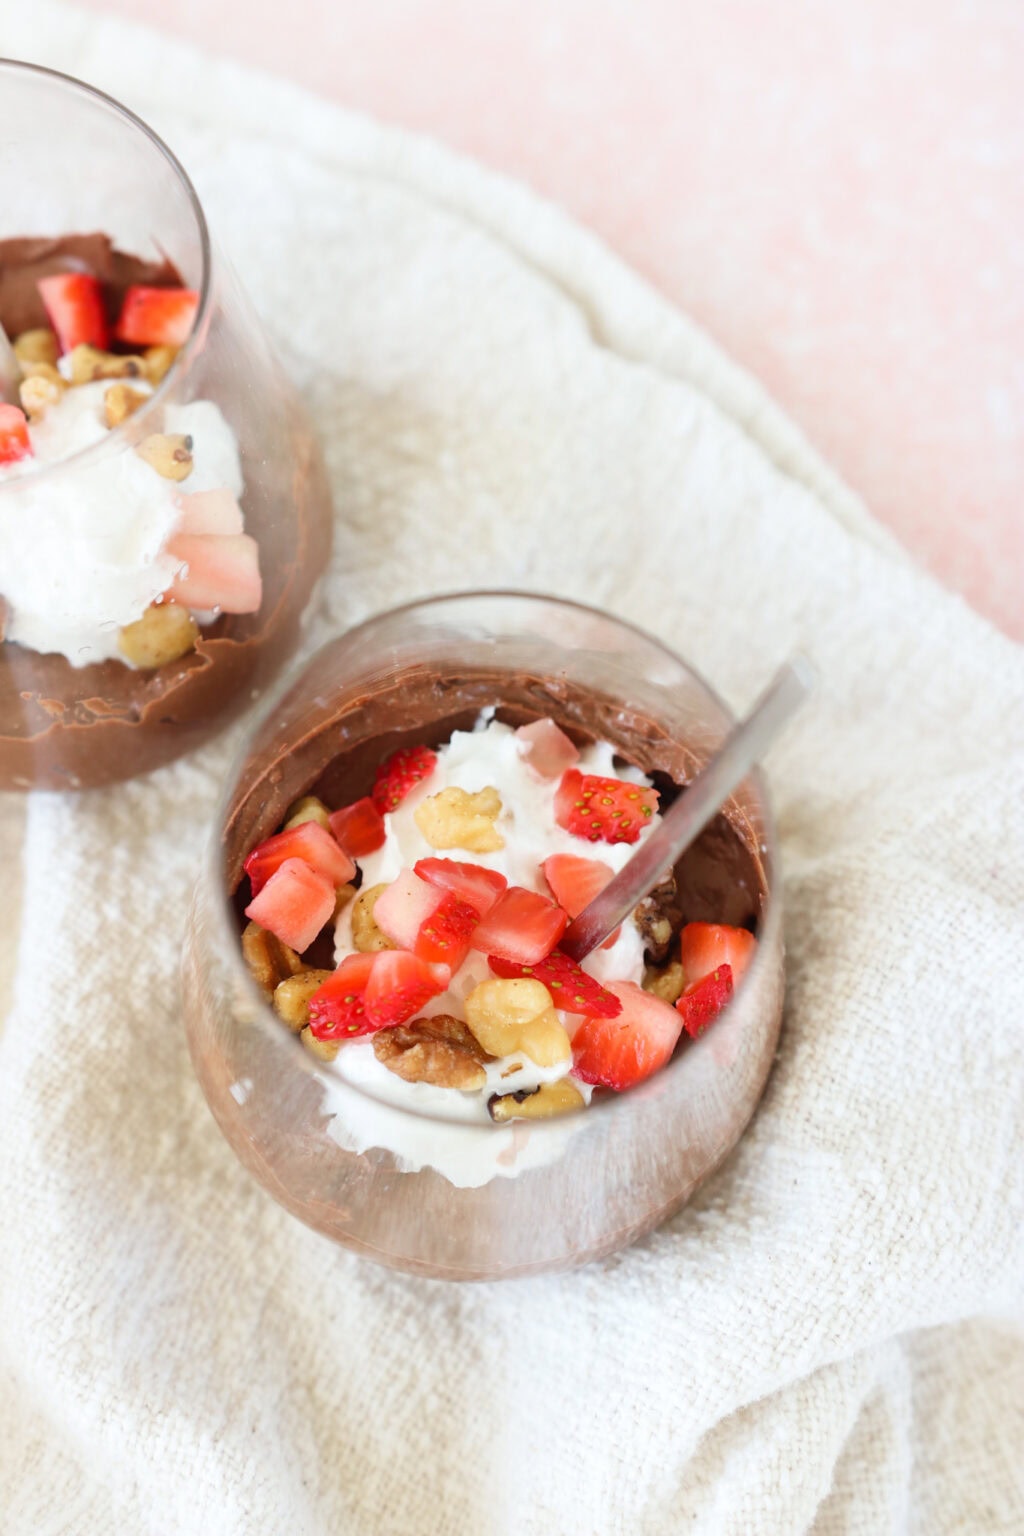 5-Minute Cottage Cheese Chocolate Mousse in a glass cup with strawberries and walnuts